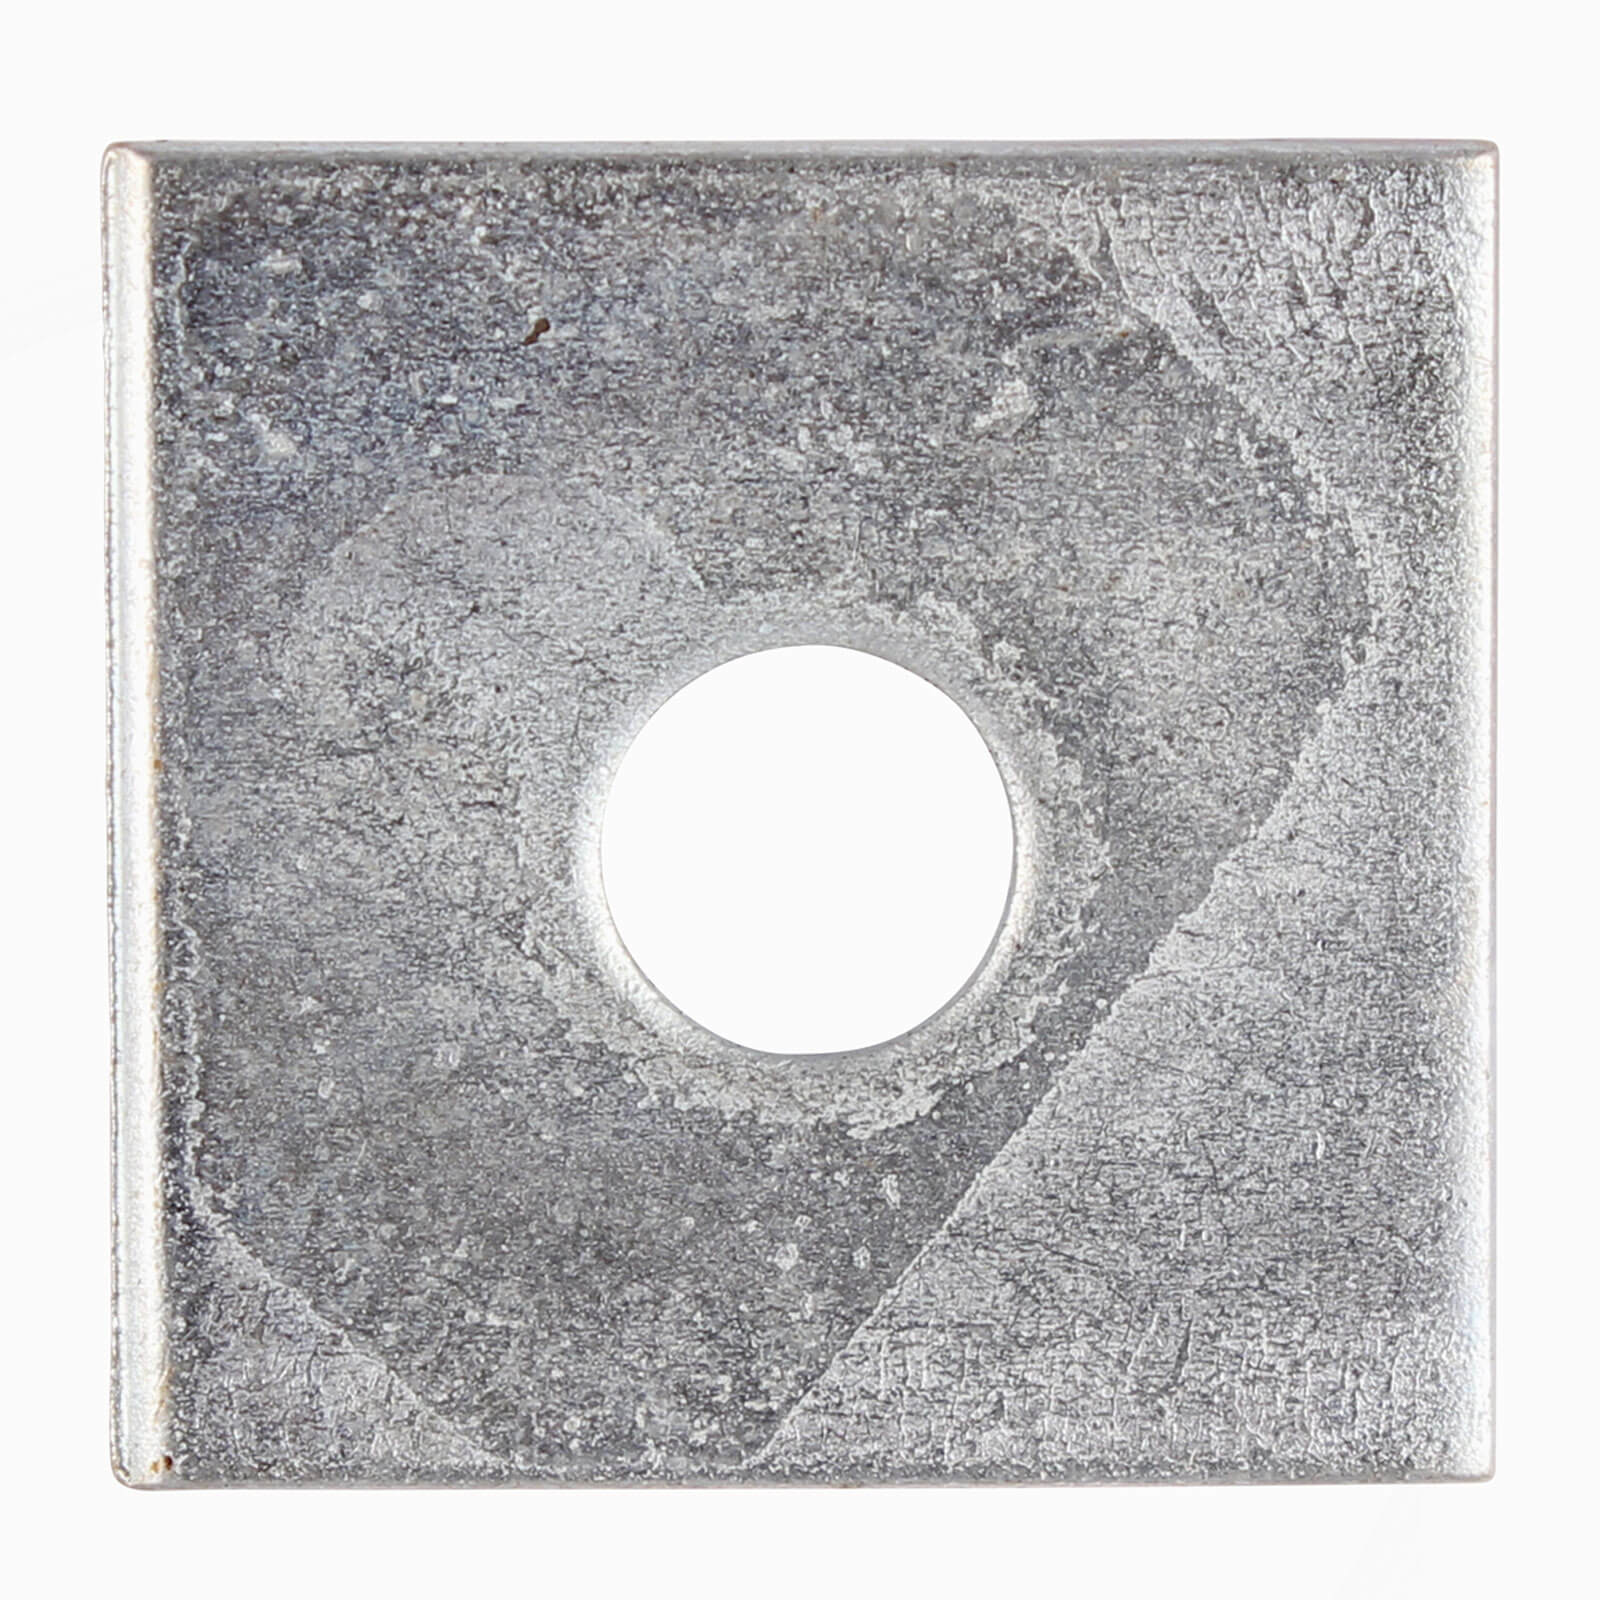 Image of Square Plate Washer Zinc Plated 10mm 50mm Pack of 100